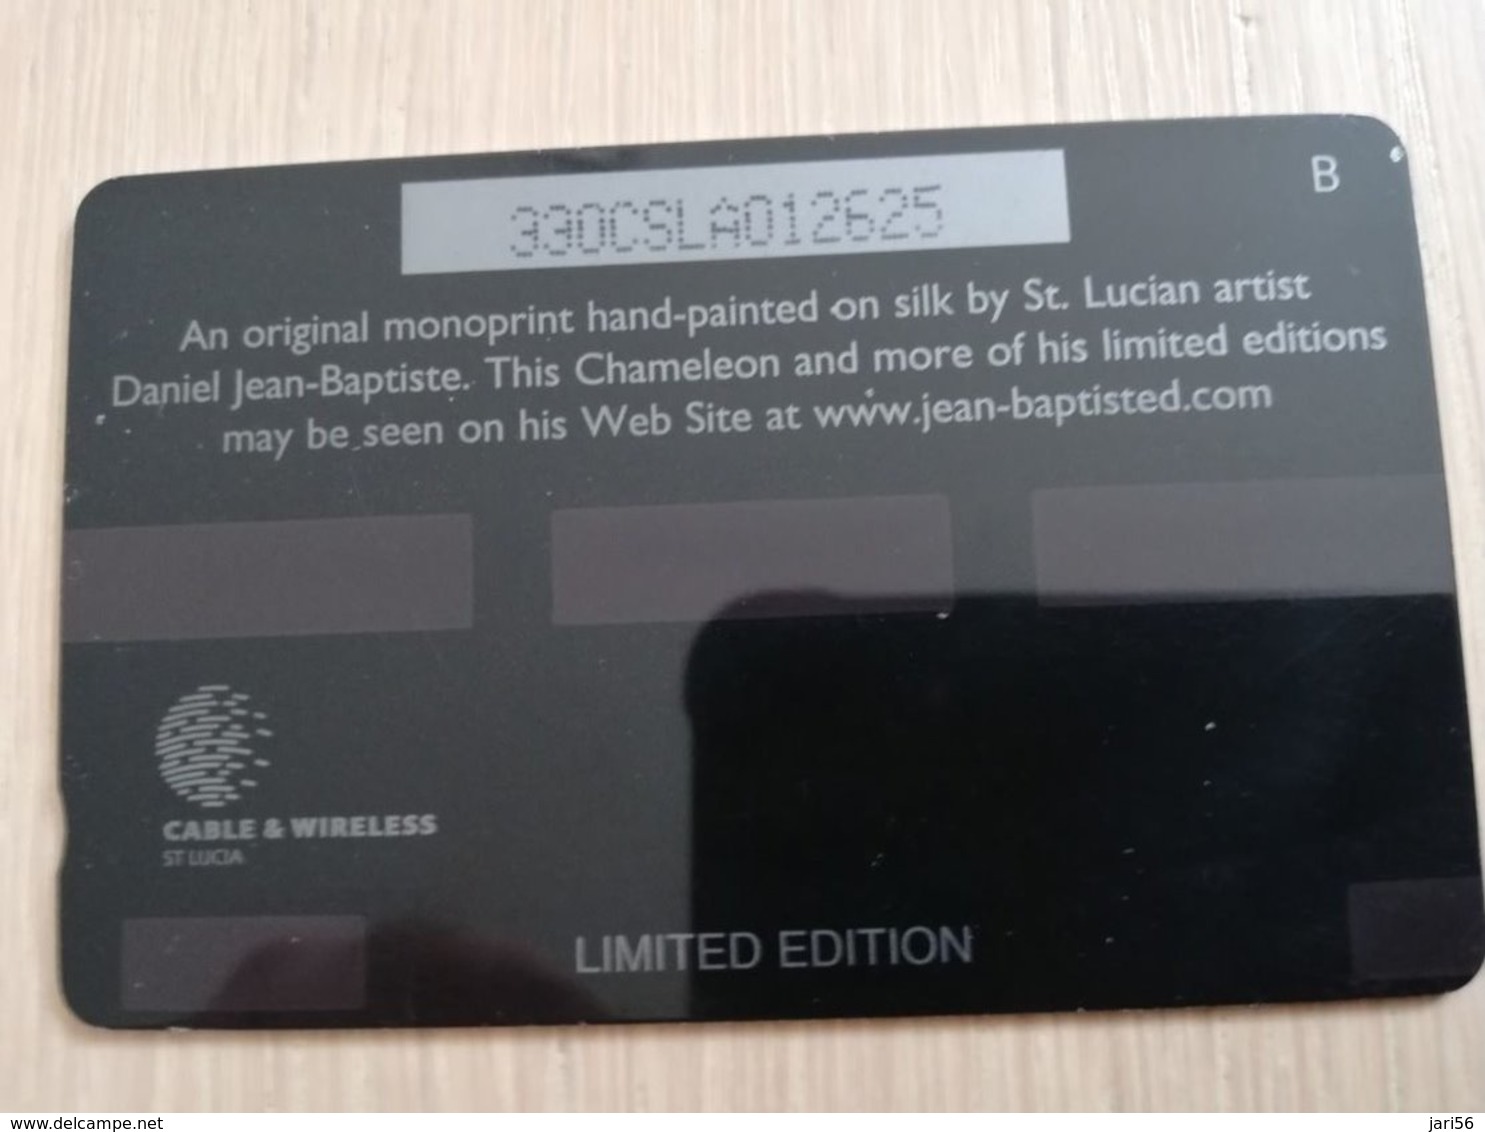 ST LUCIA    $ 40   CABLE & WIRELESS  STL-330A   330CSLA    CHAMELEON    Fine Used Card ** 2462** - St. Lucia